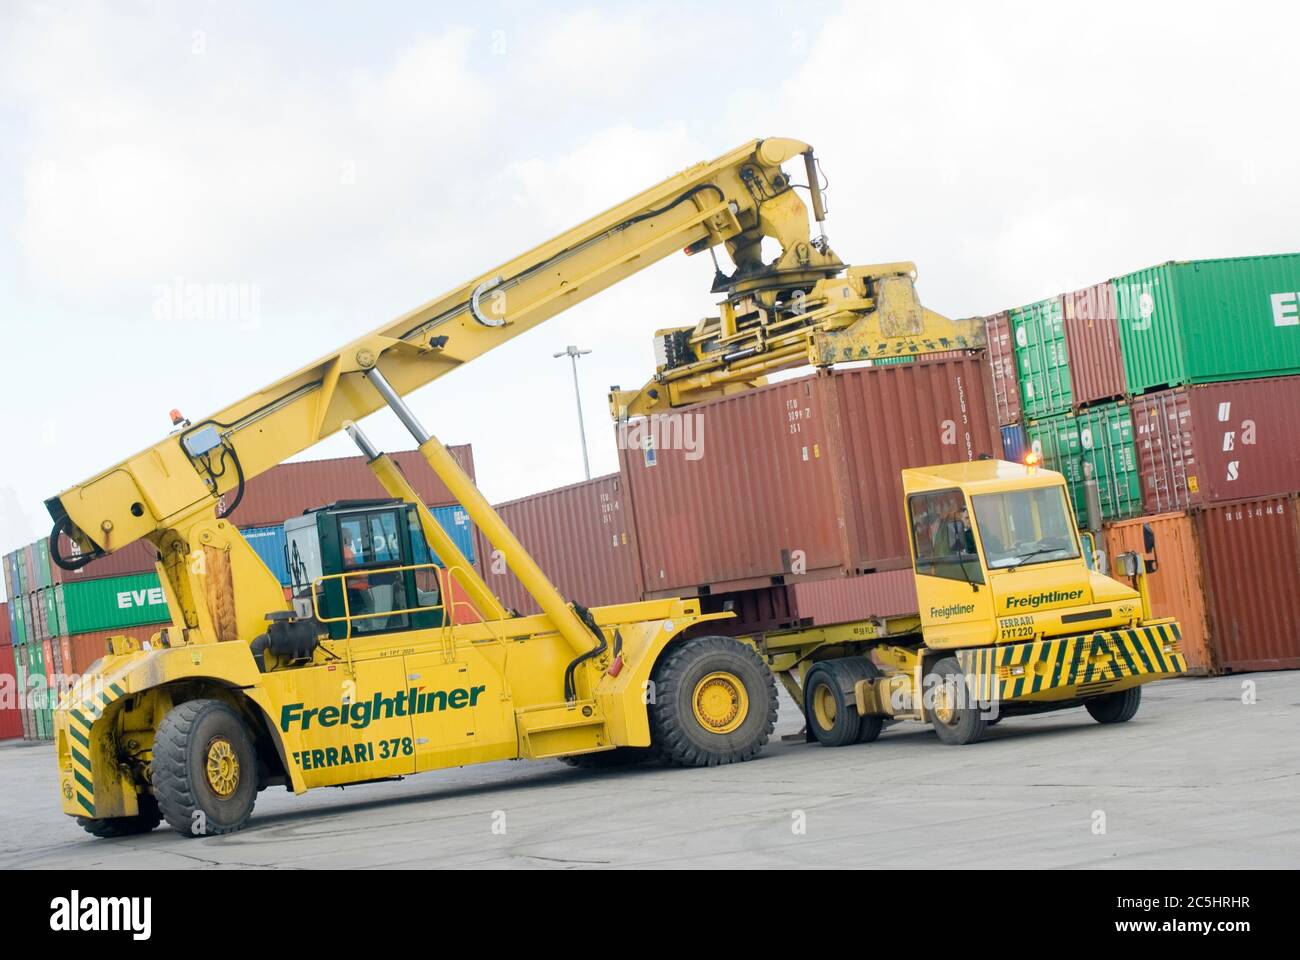 CVS Ferrari reach stacker and terminal tractor being used to move shipping containers at Manchester Euroterminal, Trafford Park, Manchester, England. Stock Photo